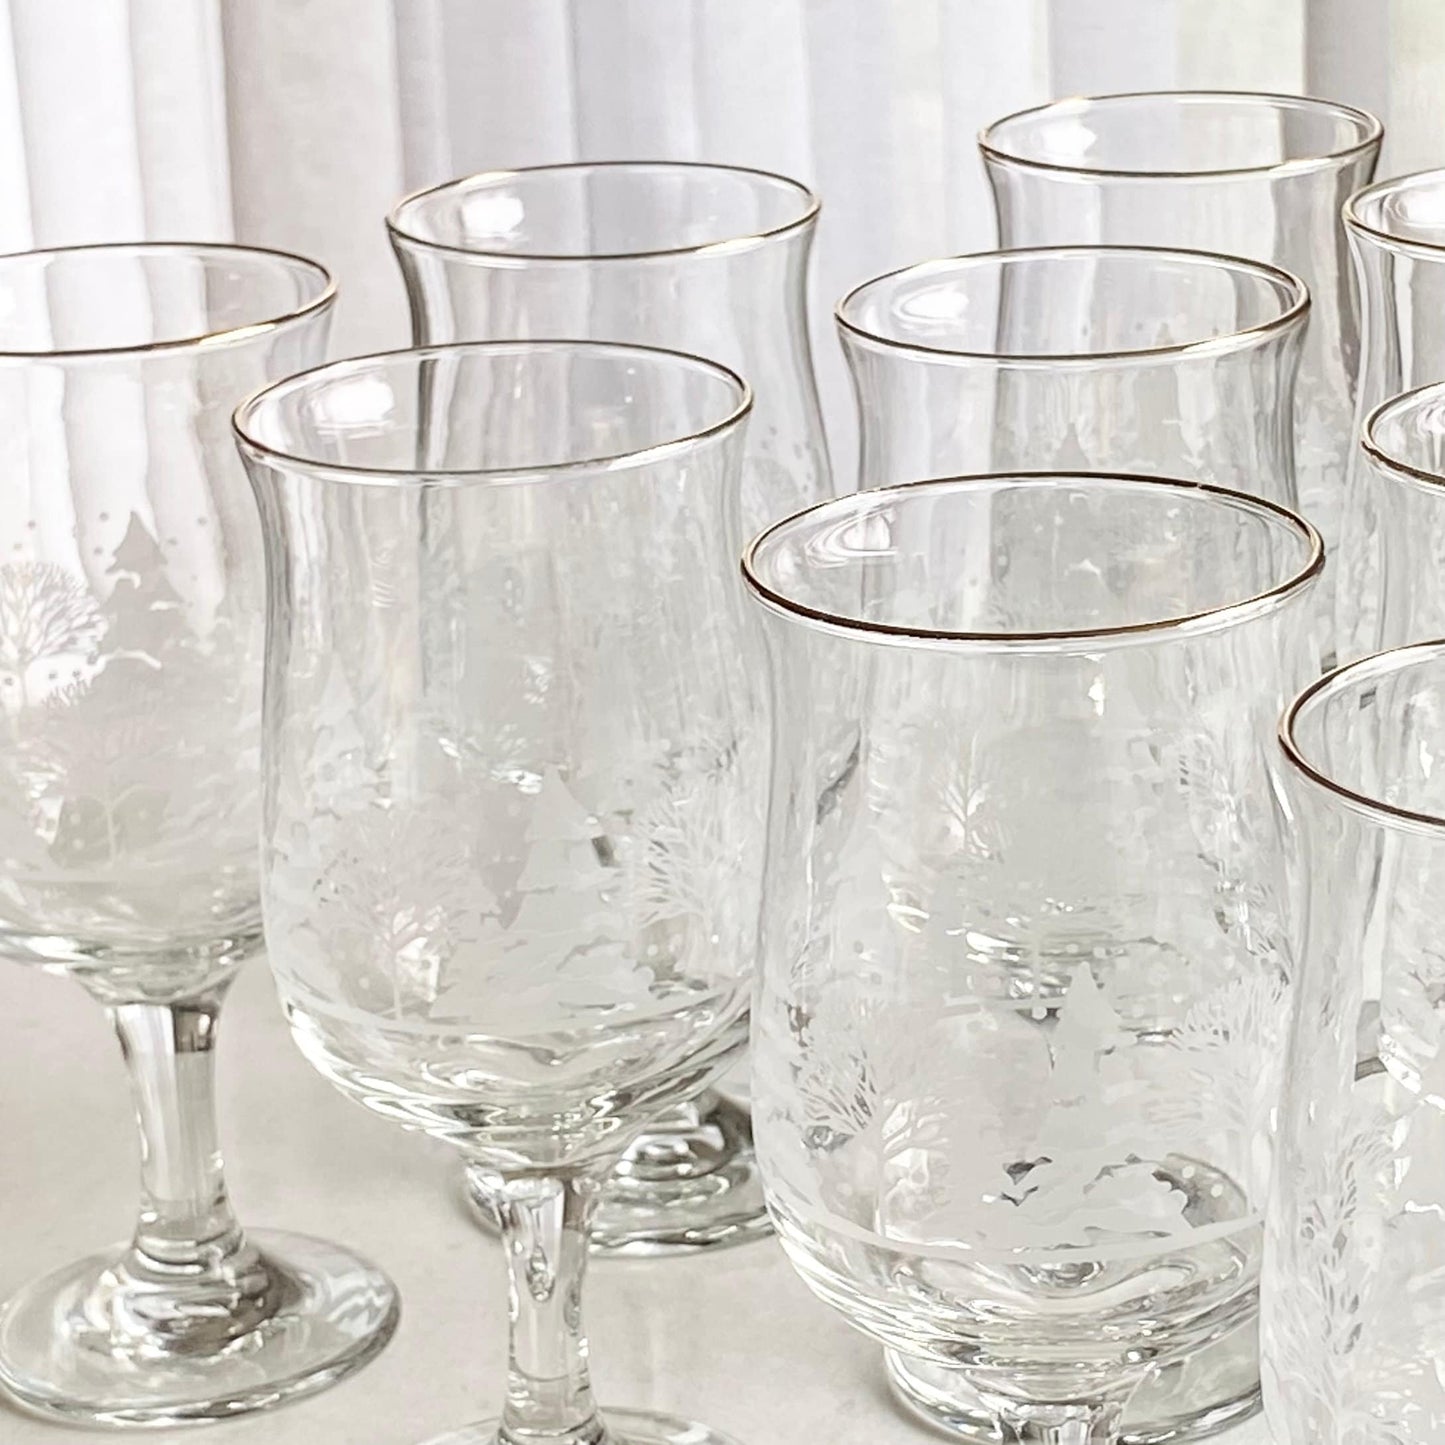 Vintage Lynn's Christmas Pines Glasses Made for Arby's - Set of 10 (#10B)